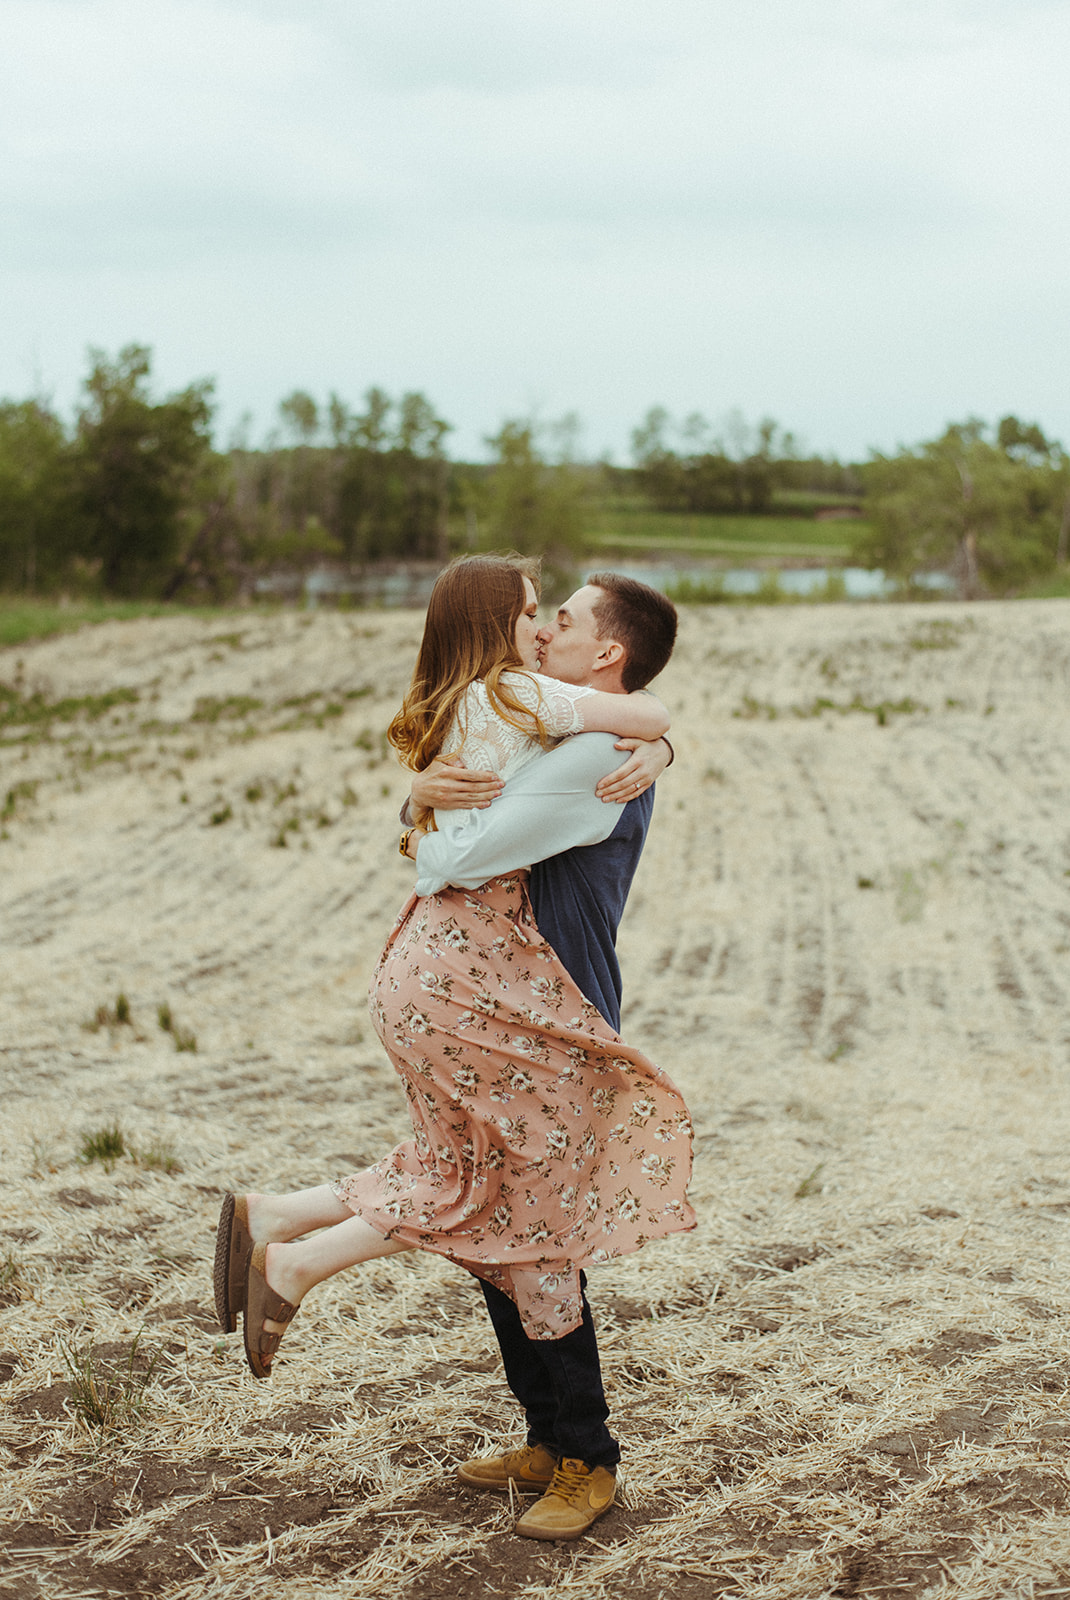 6 Tips All About Choosing Outfits For Your Engagement Session - Jessica Kaitlyn featured on Bronte Bride